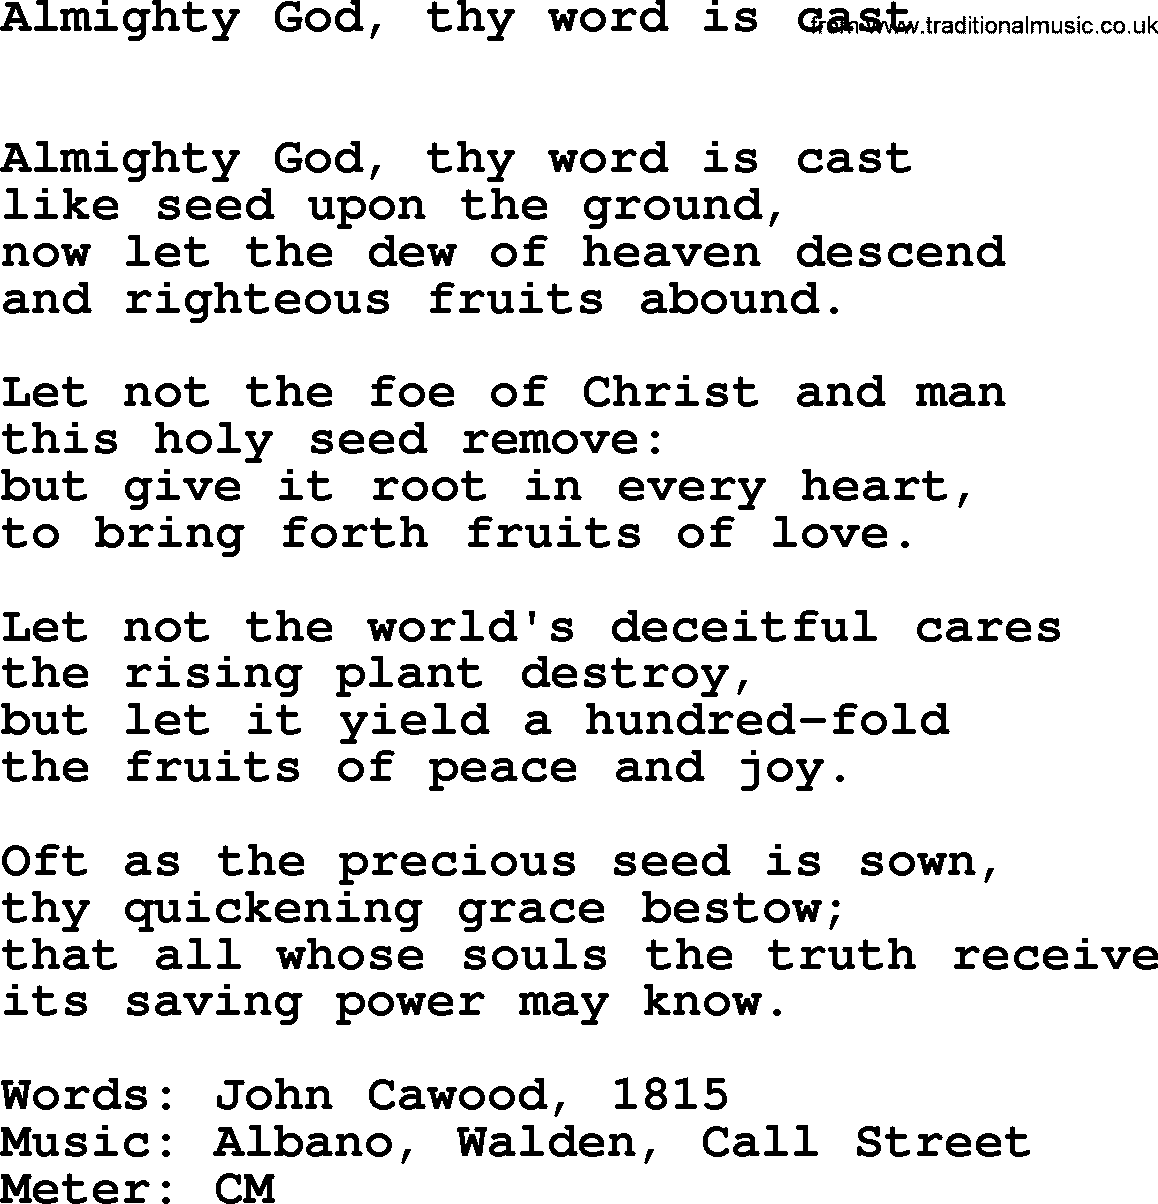 Book of Common Praise Hymn: Almighty God, Thy Word Is Cast.txt lyrics with midi music